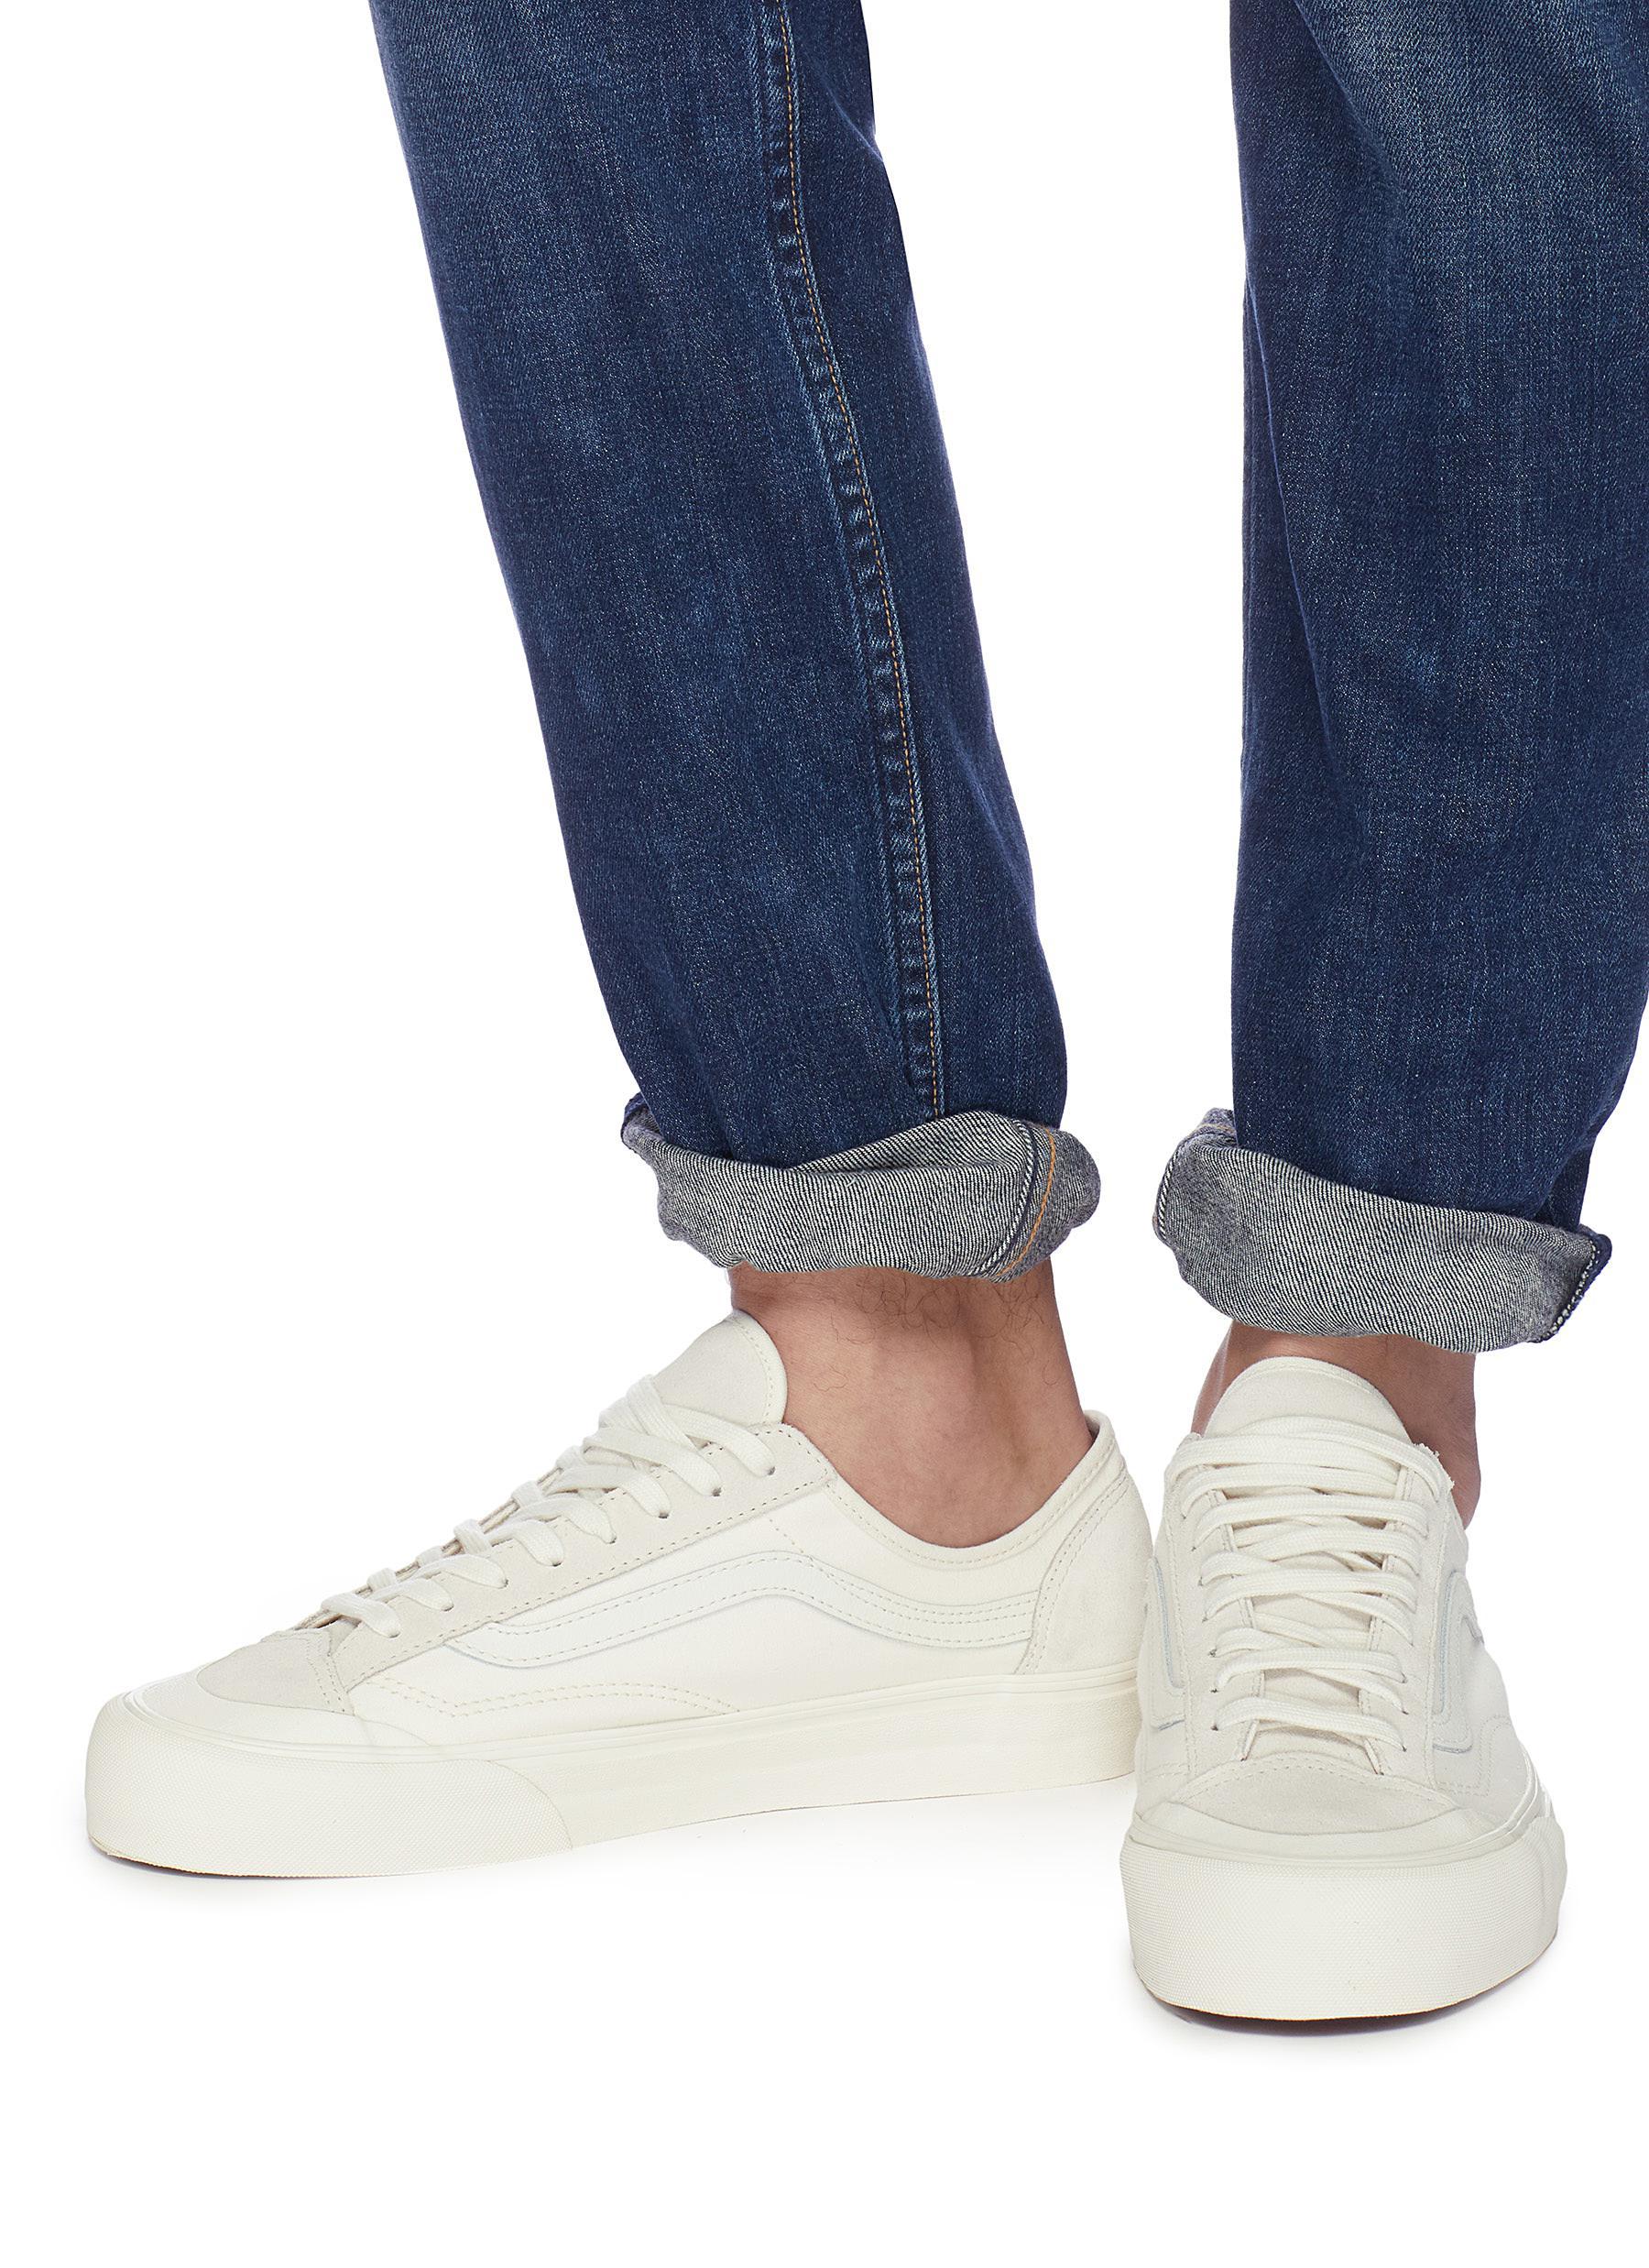 Vans 'style 36 Decon Sf' Canvas Sneakers in White for Men | Lyst